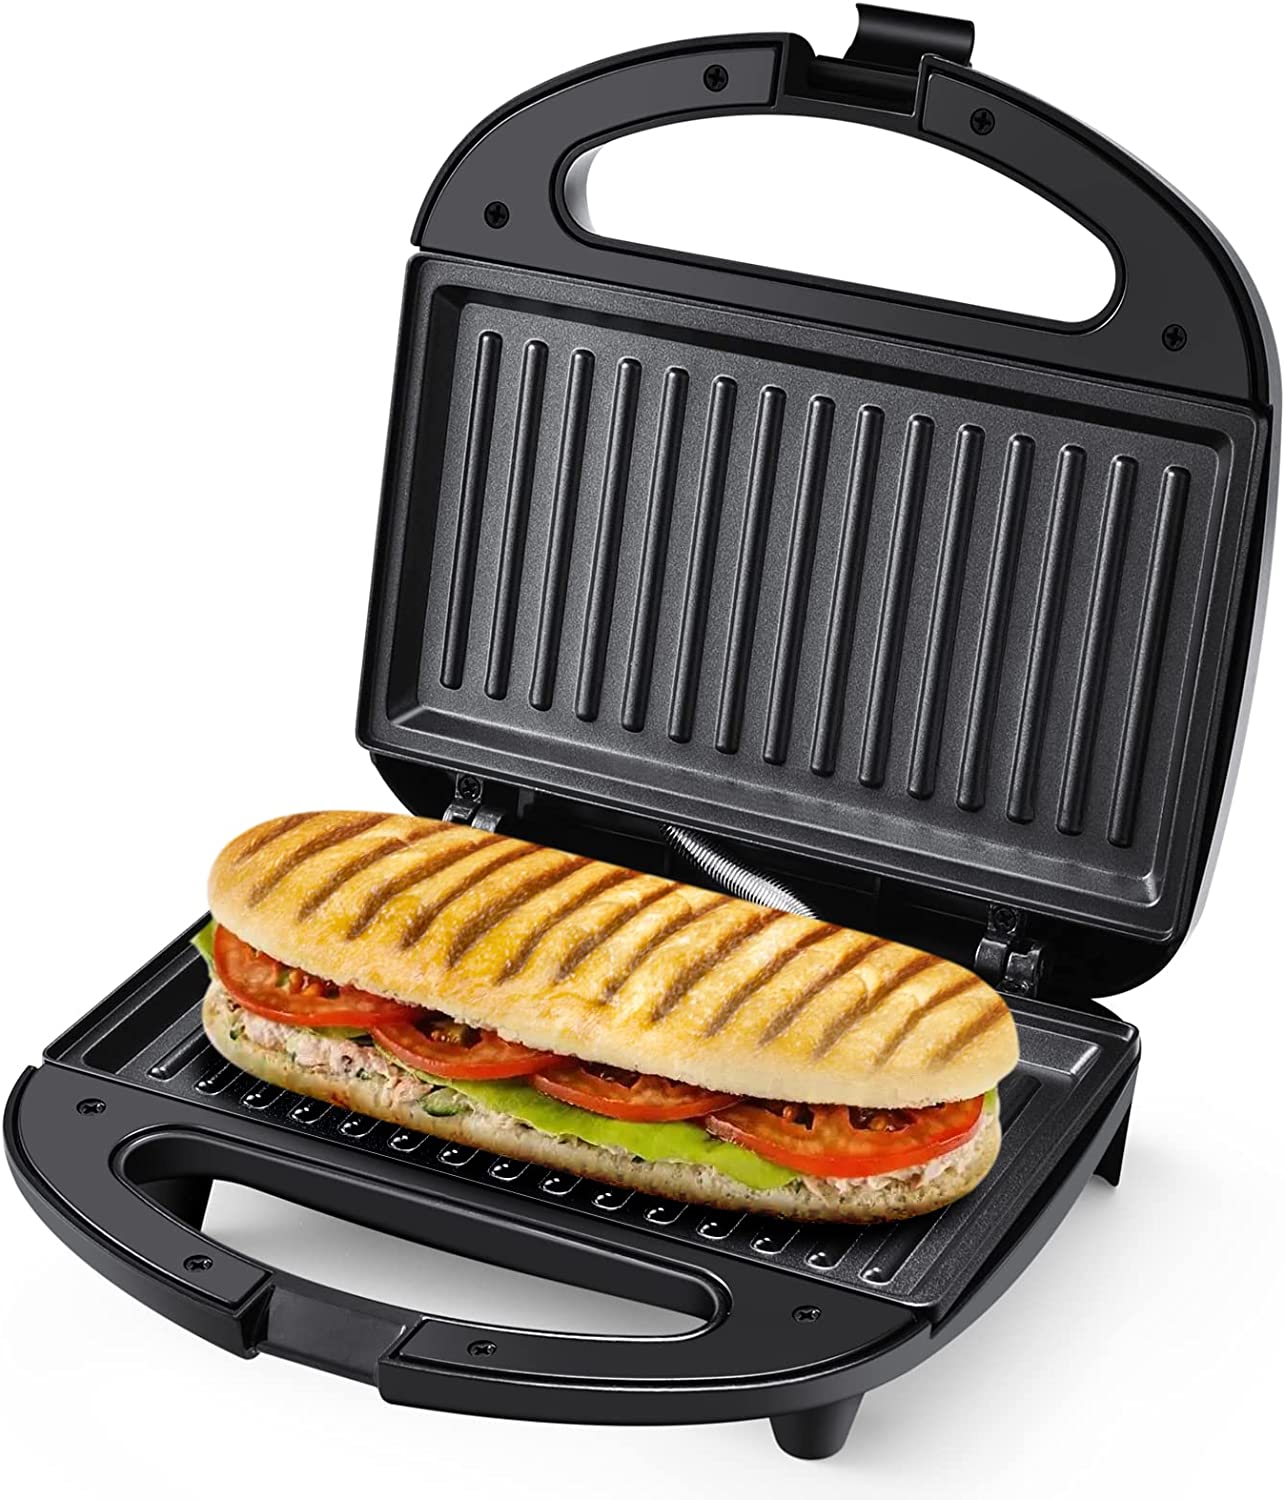 Tiastar MONXOOK Panini Maker/Sandwich Toaster/Contact Grill, 750 W Sandwich Maker, Non-Stick Coated Plates, Automatic Temperature Control, Indicator Lights, Heat Insulated Handle, BPA Free, Stainless Steel/Black